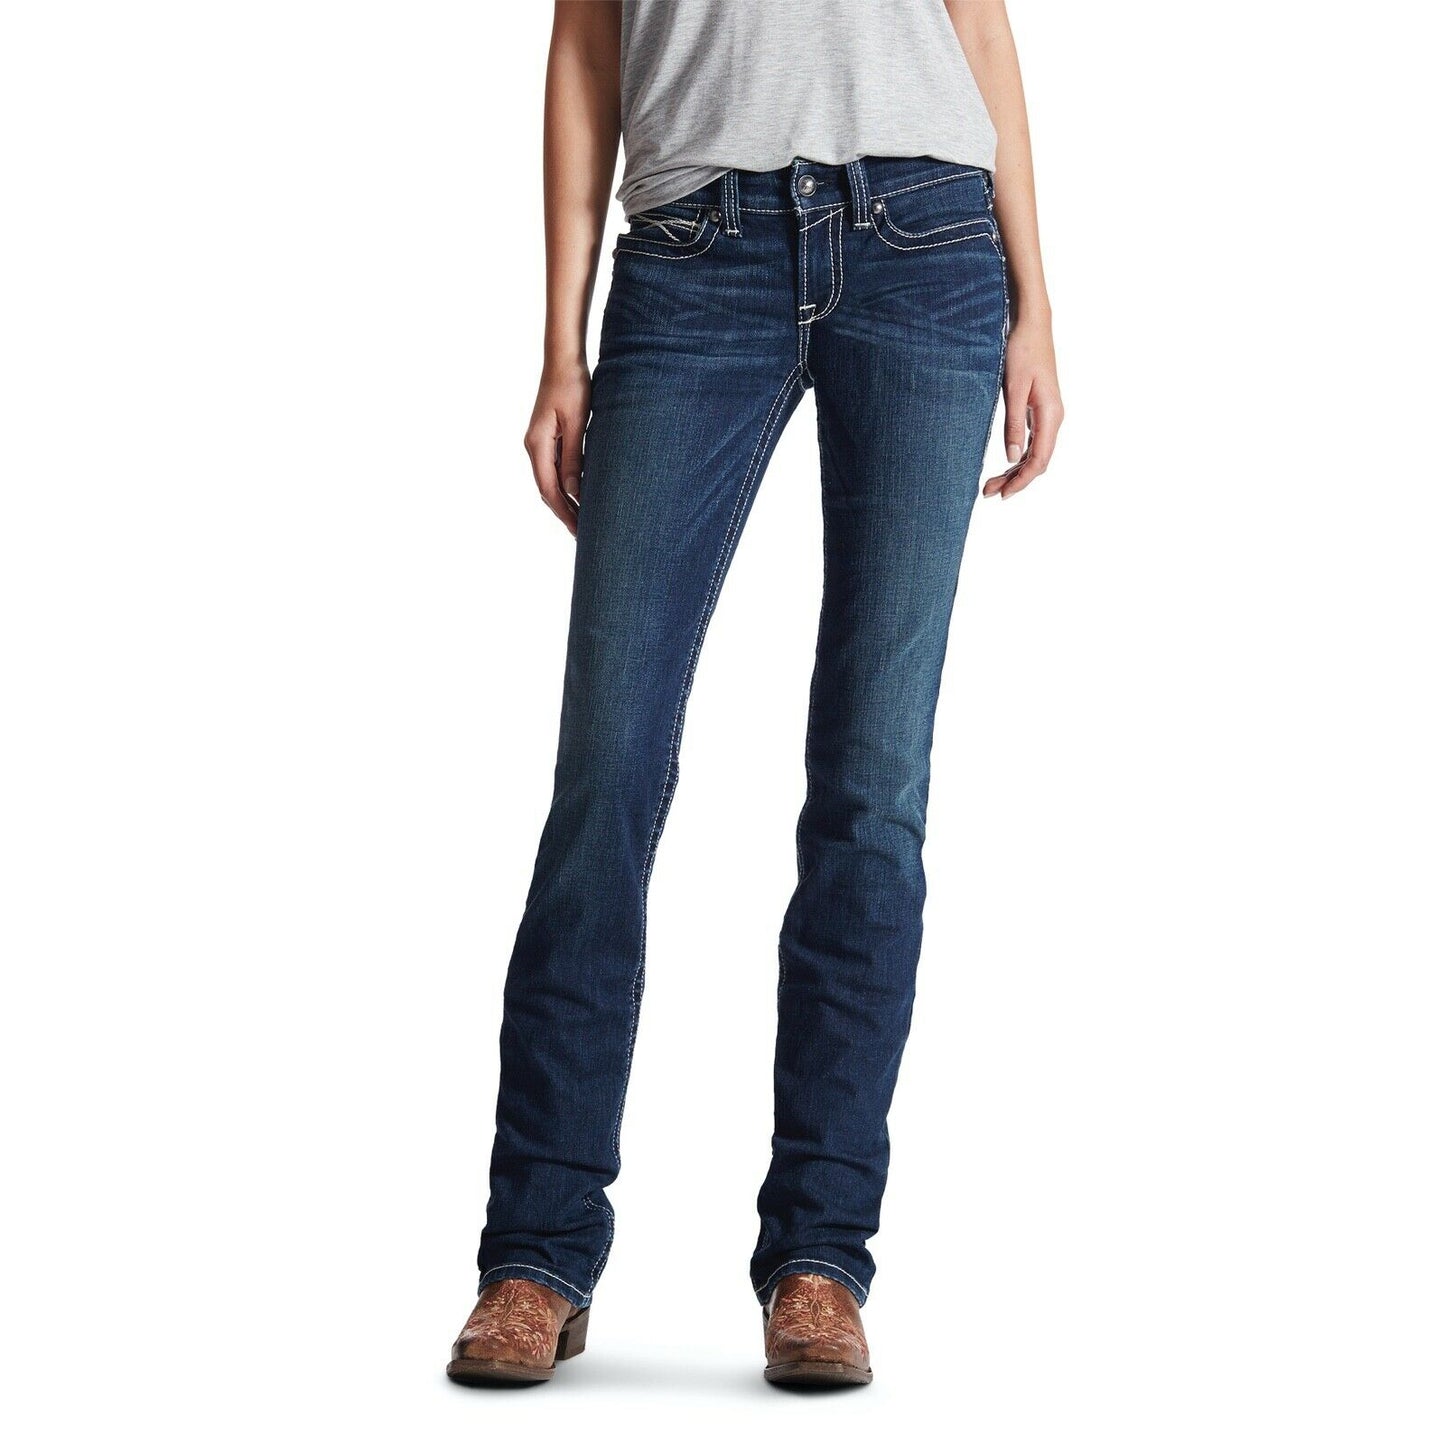 Vintage High Waisted Straight Ariat Jeans For Women With Star Pockets For  Women Loose Fit, Versatile, And Casual Streetwear Daily Wear From  Alessioily, $36.81